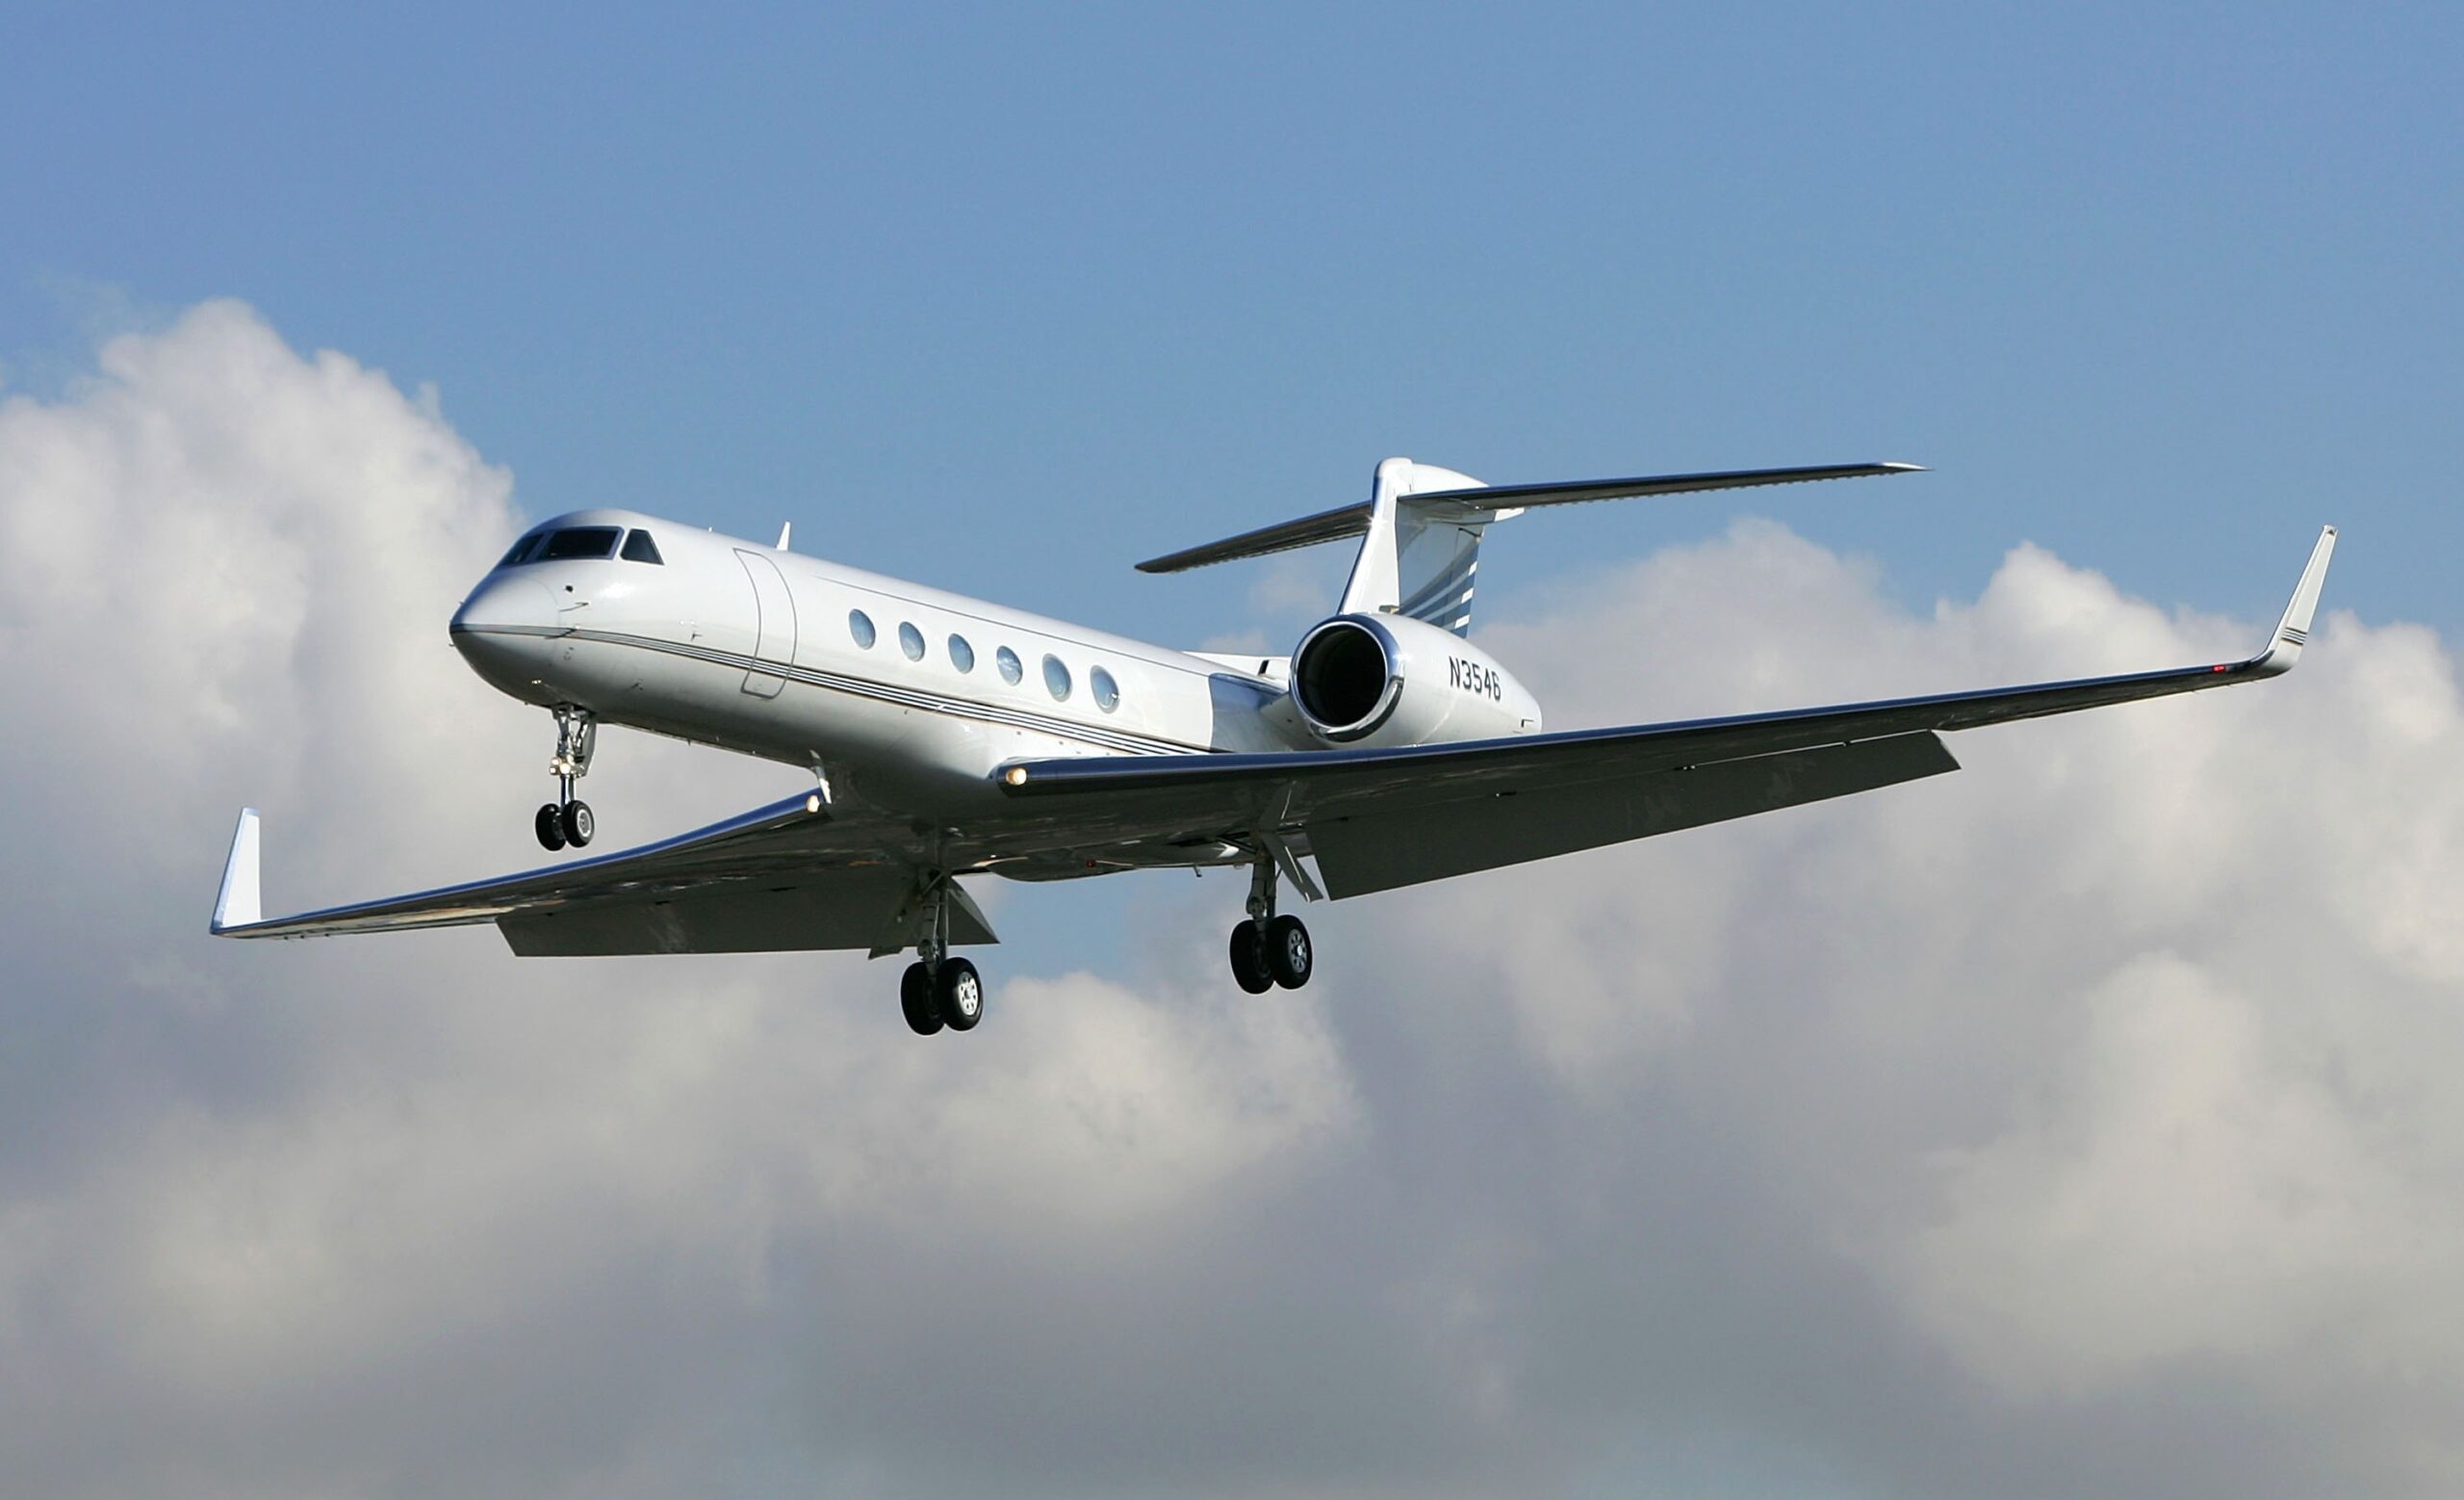 Tiger Woods Private Airlines Gulfstream G550